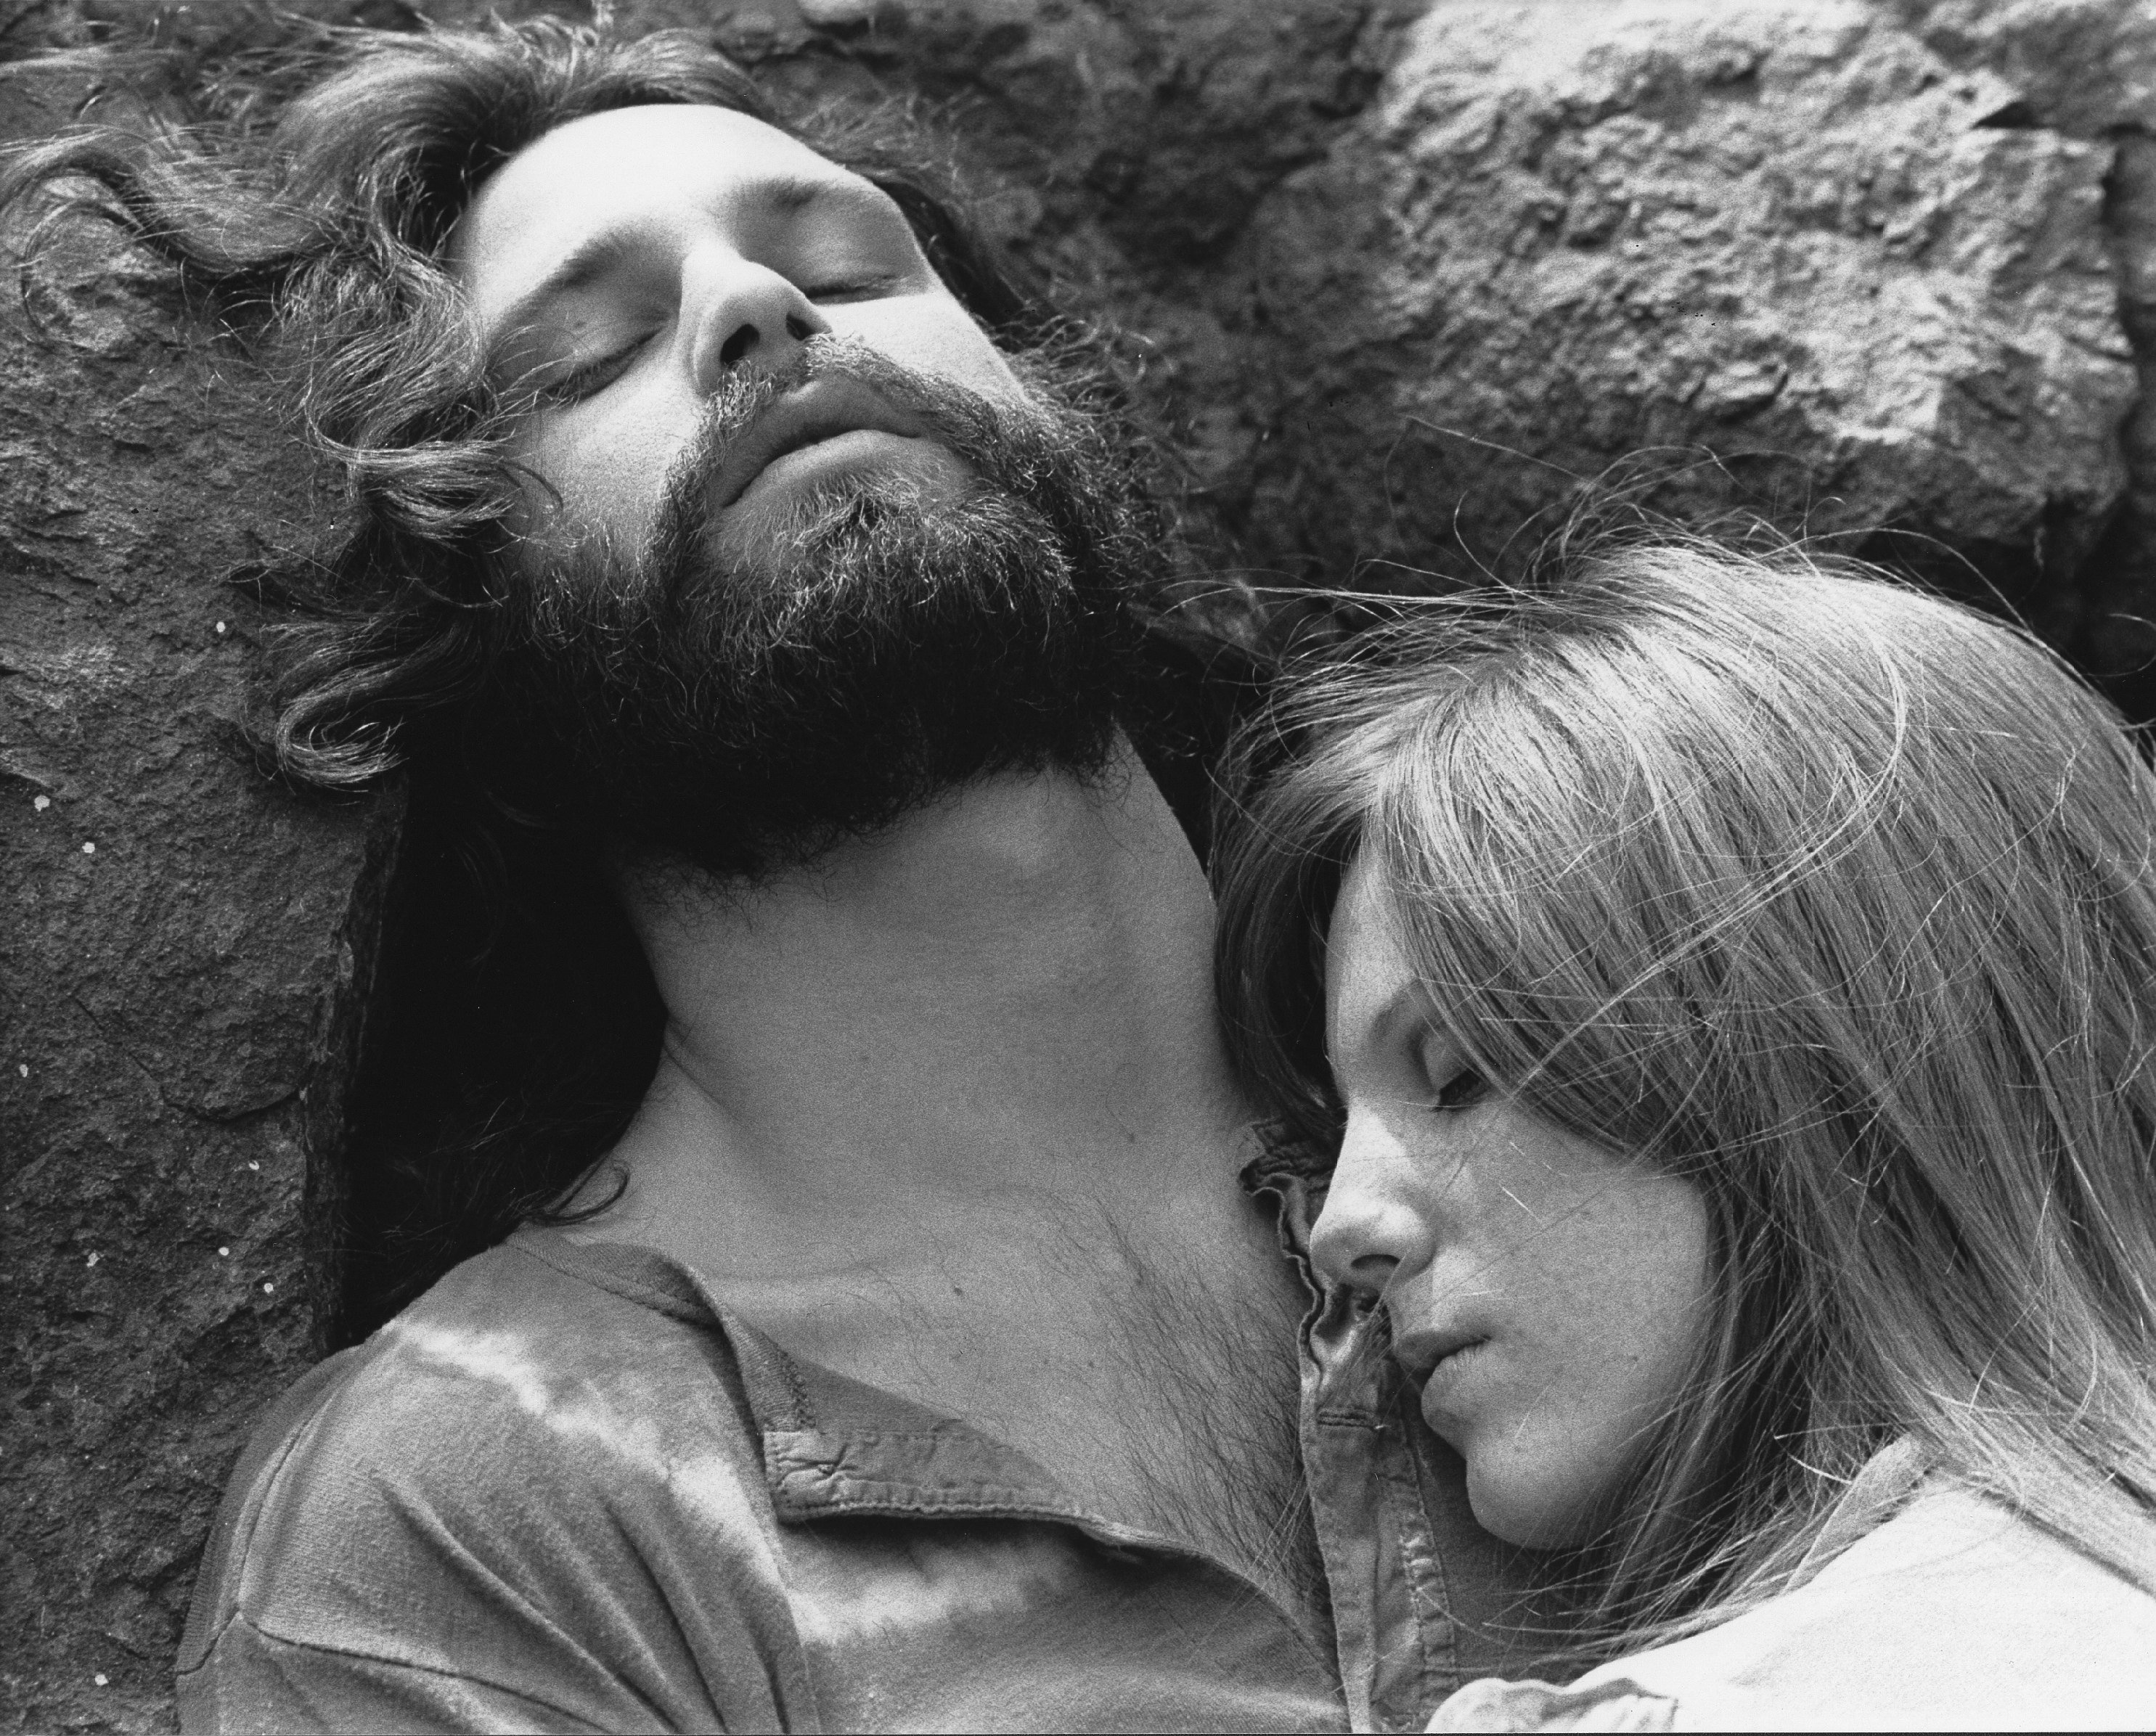 Singer Jim Morrison of The Doors with girlfriend Pamela Courson during a 1969 photo shoot at Bronson Caves in the Hollywood Hills, California. | Source: Getty Imaged